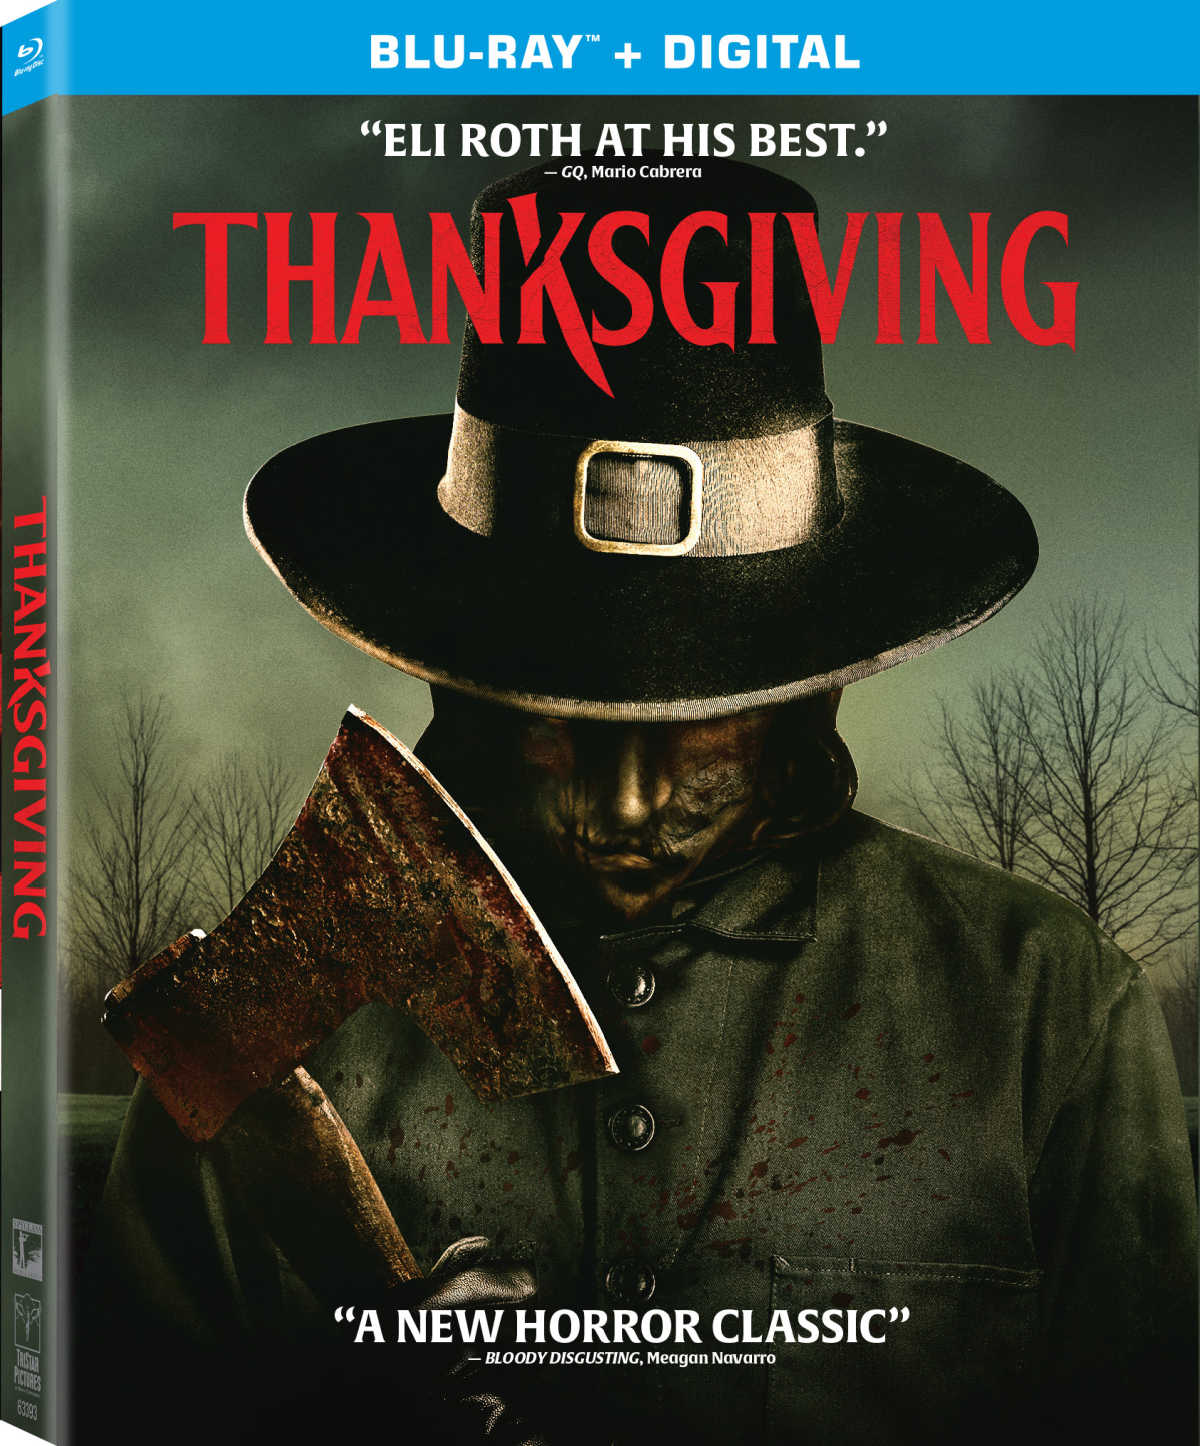 Forget cranberry sauce and stuffing, this Thanksgiving horror movie serves up bloody mayhem with sides of side-splitting humor! Dive into "Thanksgiving," a Plymouth-based massacre where a twisted killer turns turkey day into a terrifying turkey hunt. Can anyone survive this gruesome feast?